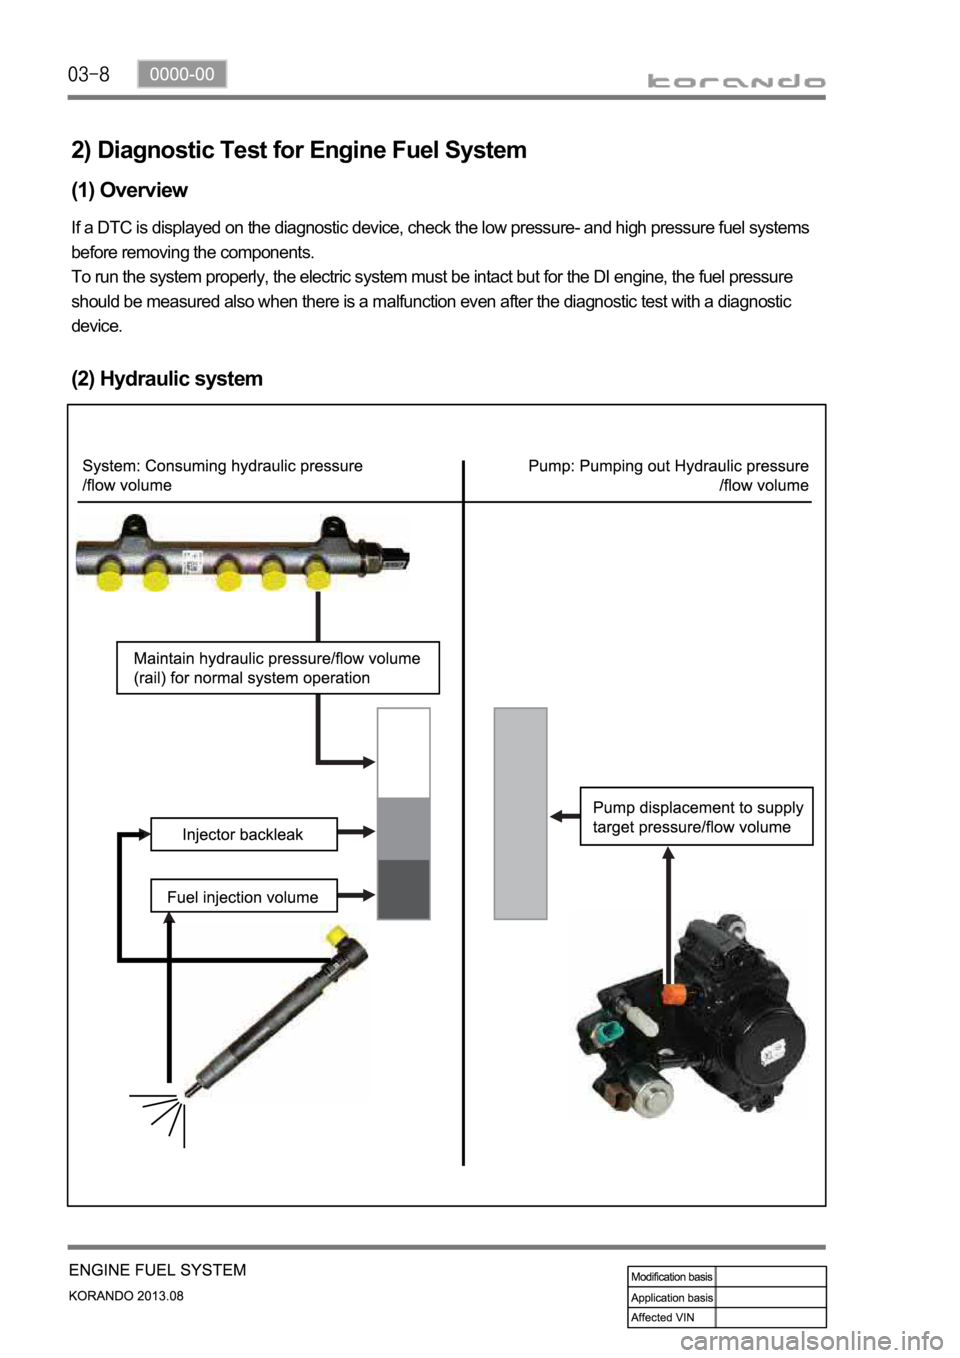 SSANGYONG KORANDO 2013  Service Manual 2) Diagnostic Test for Engine Fuel System
(1) Overview
If a DTC is displayed on the diagnostic device, check the low pressure- and high pressure fuel systems 
before removing the components.
To run th